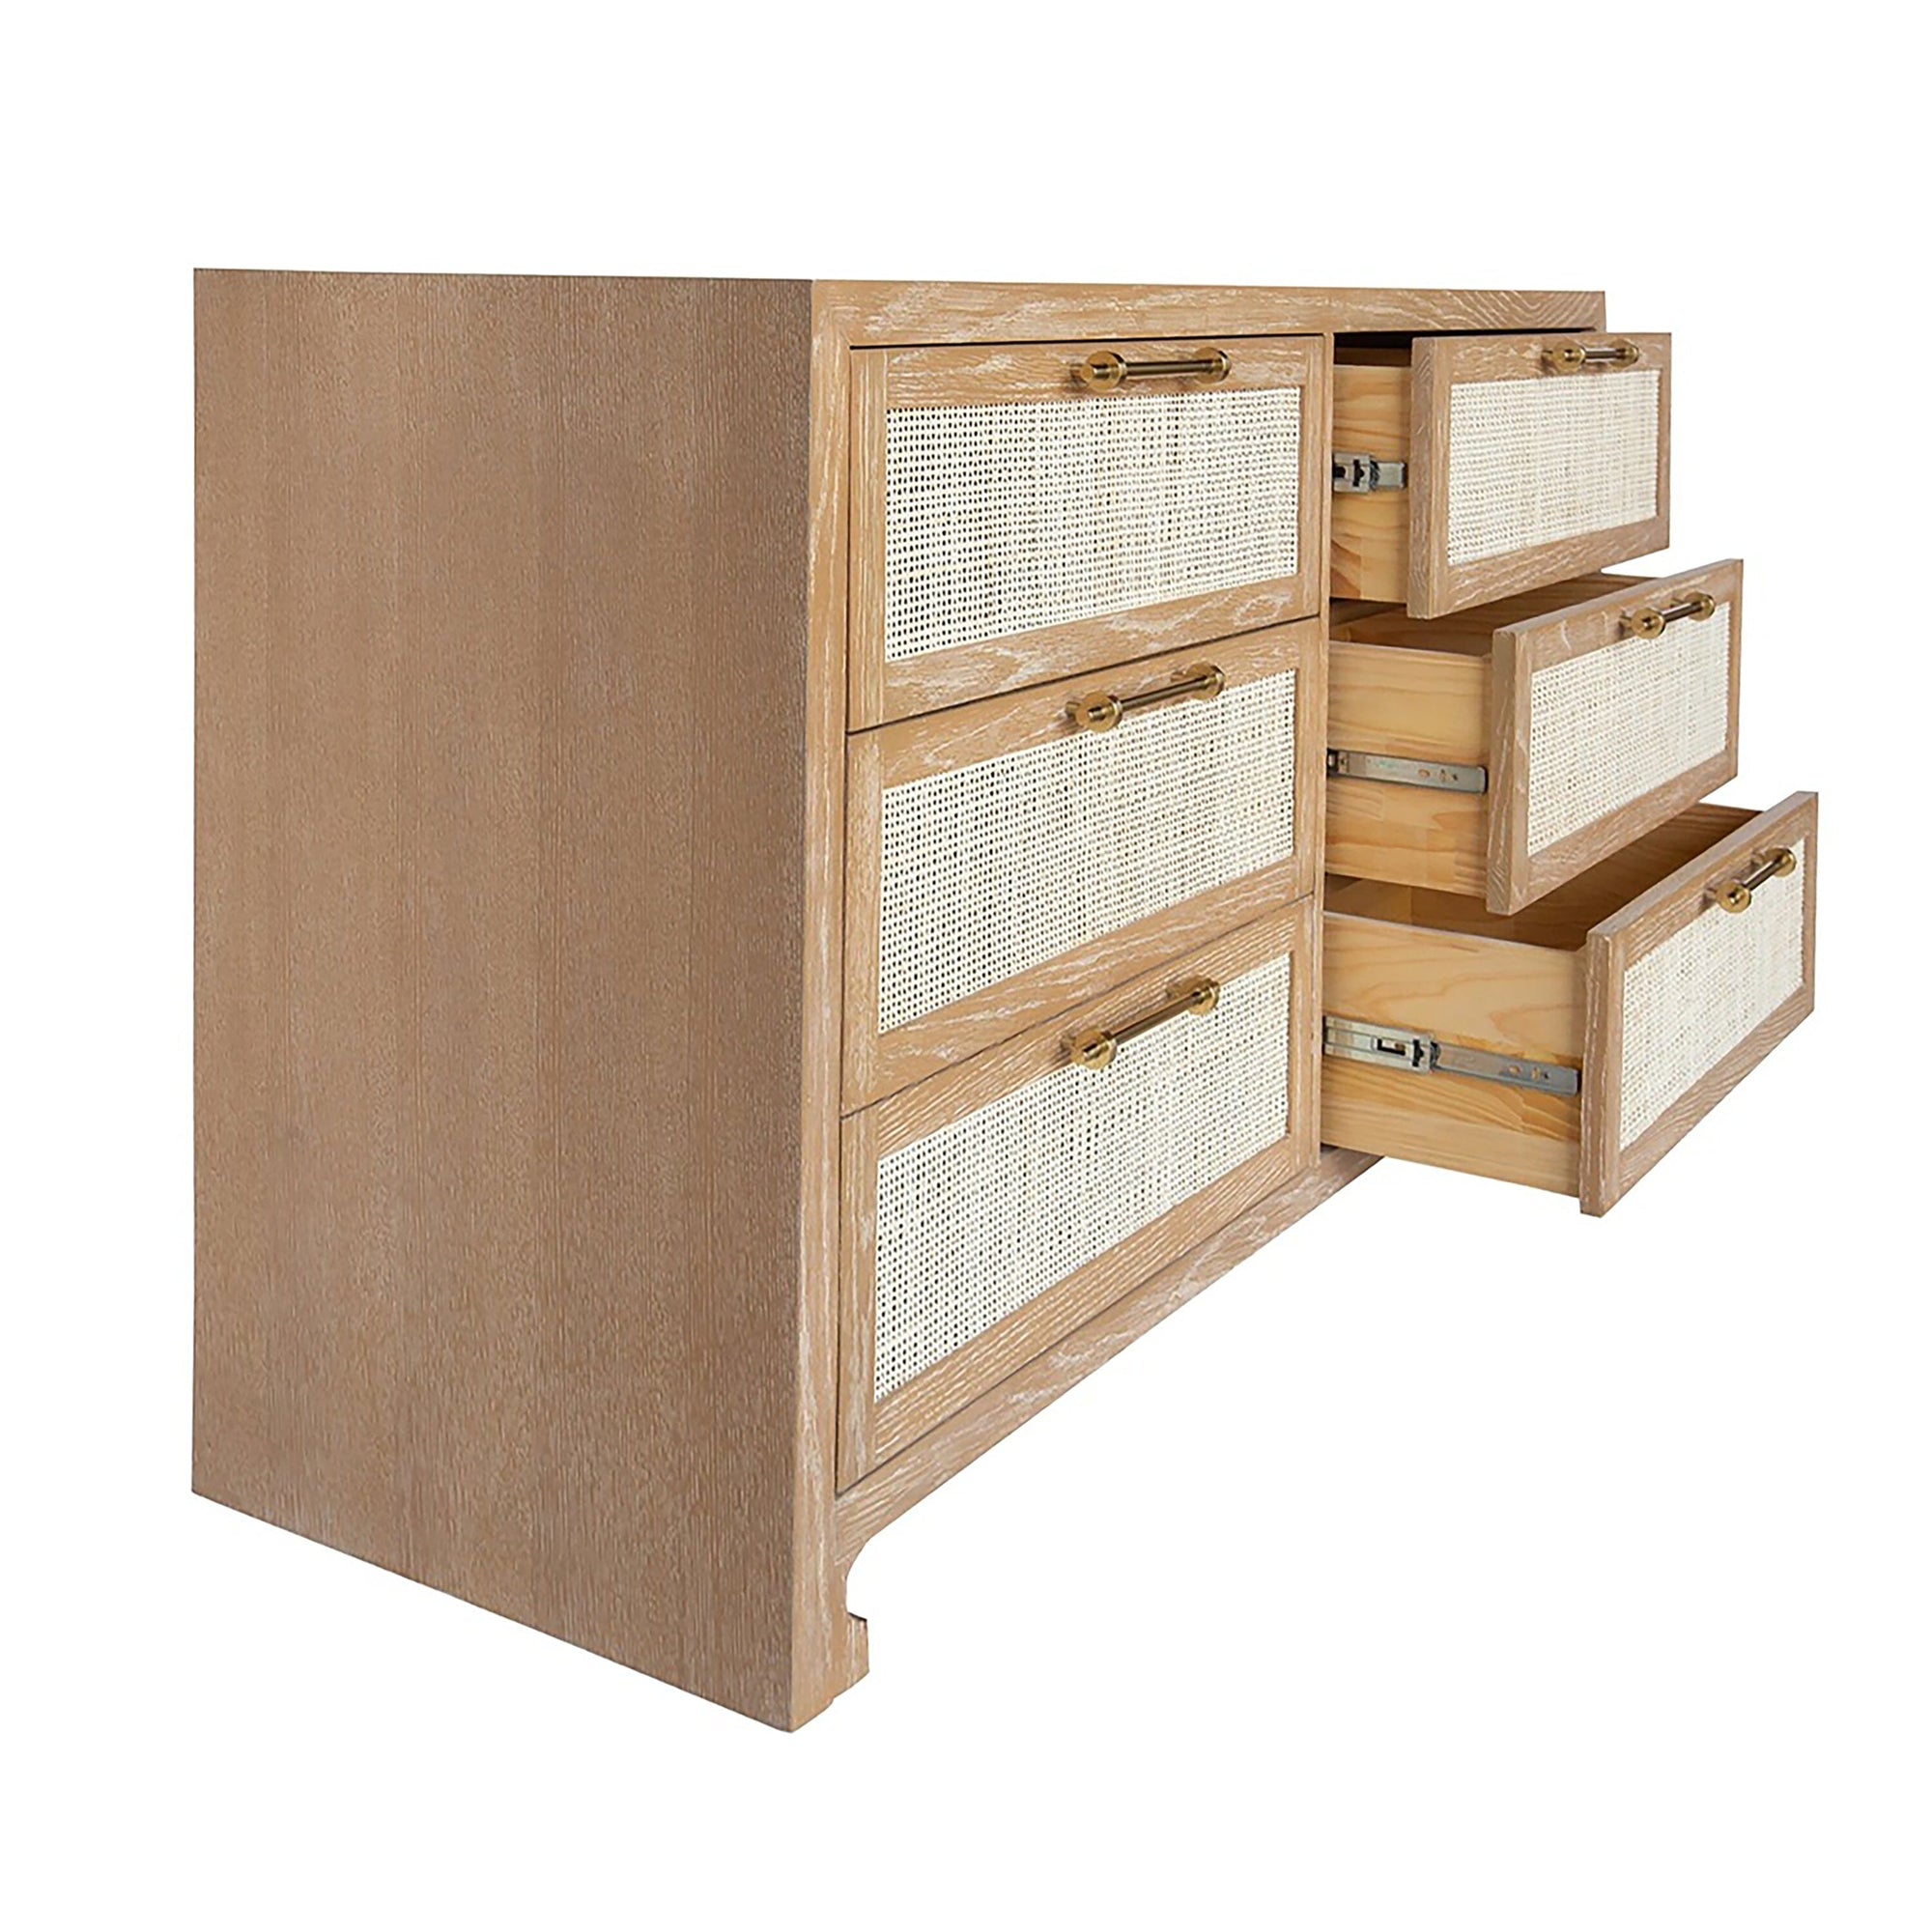 Carla Cerused Oak and Cane Dresser by Worlds Away | Chest of Drawers Front View